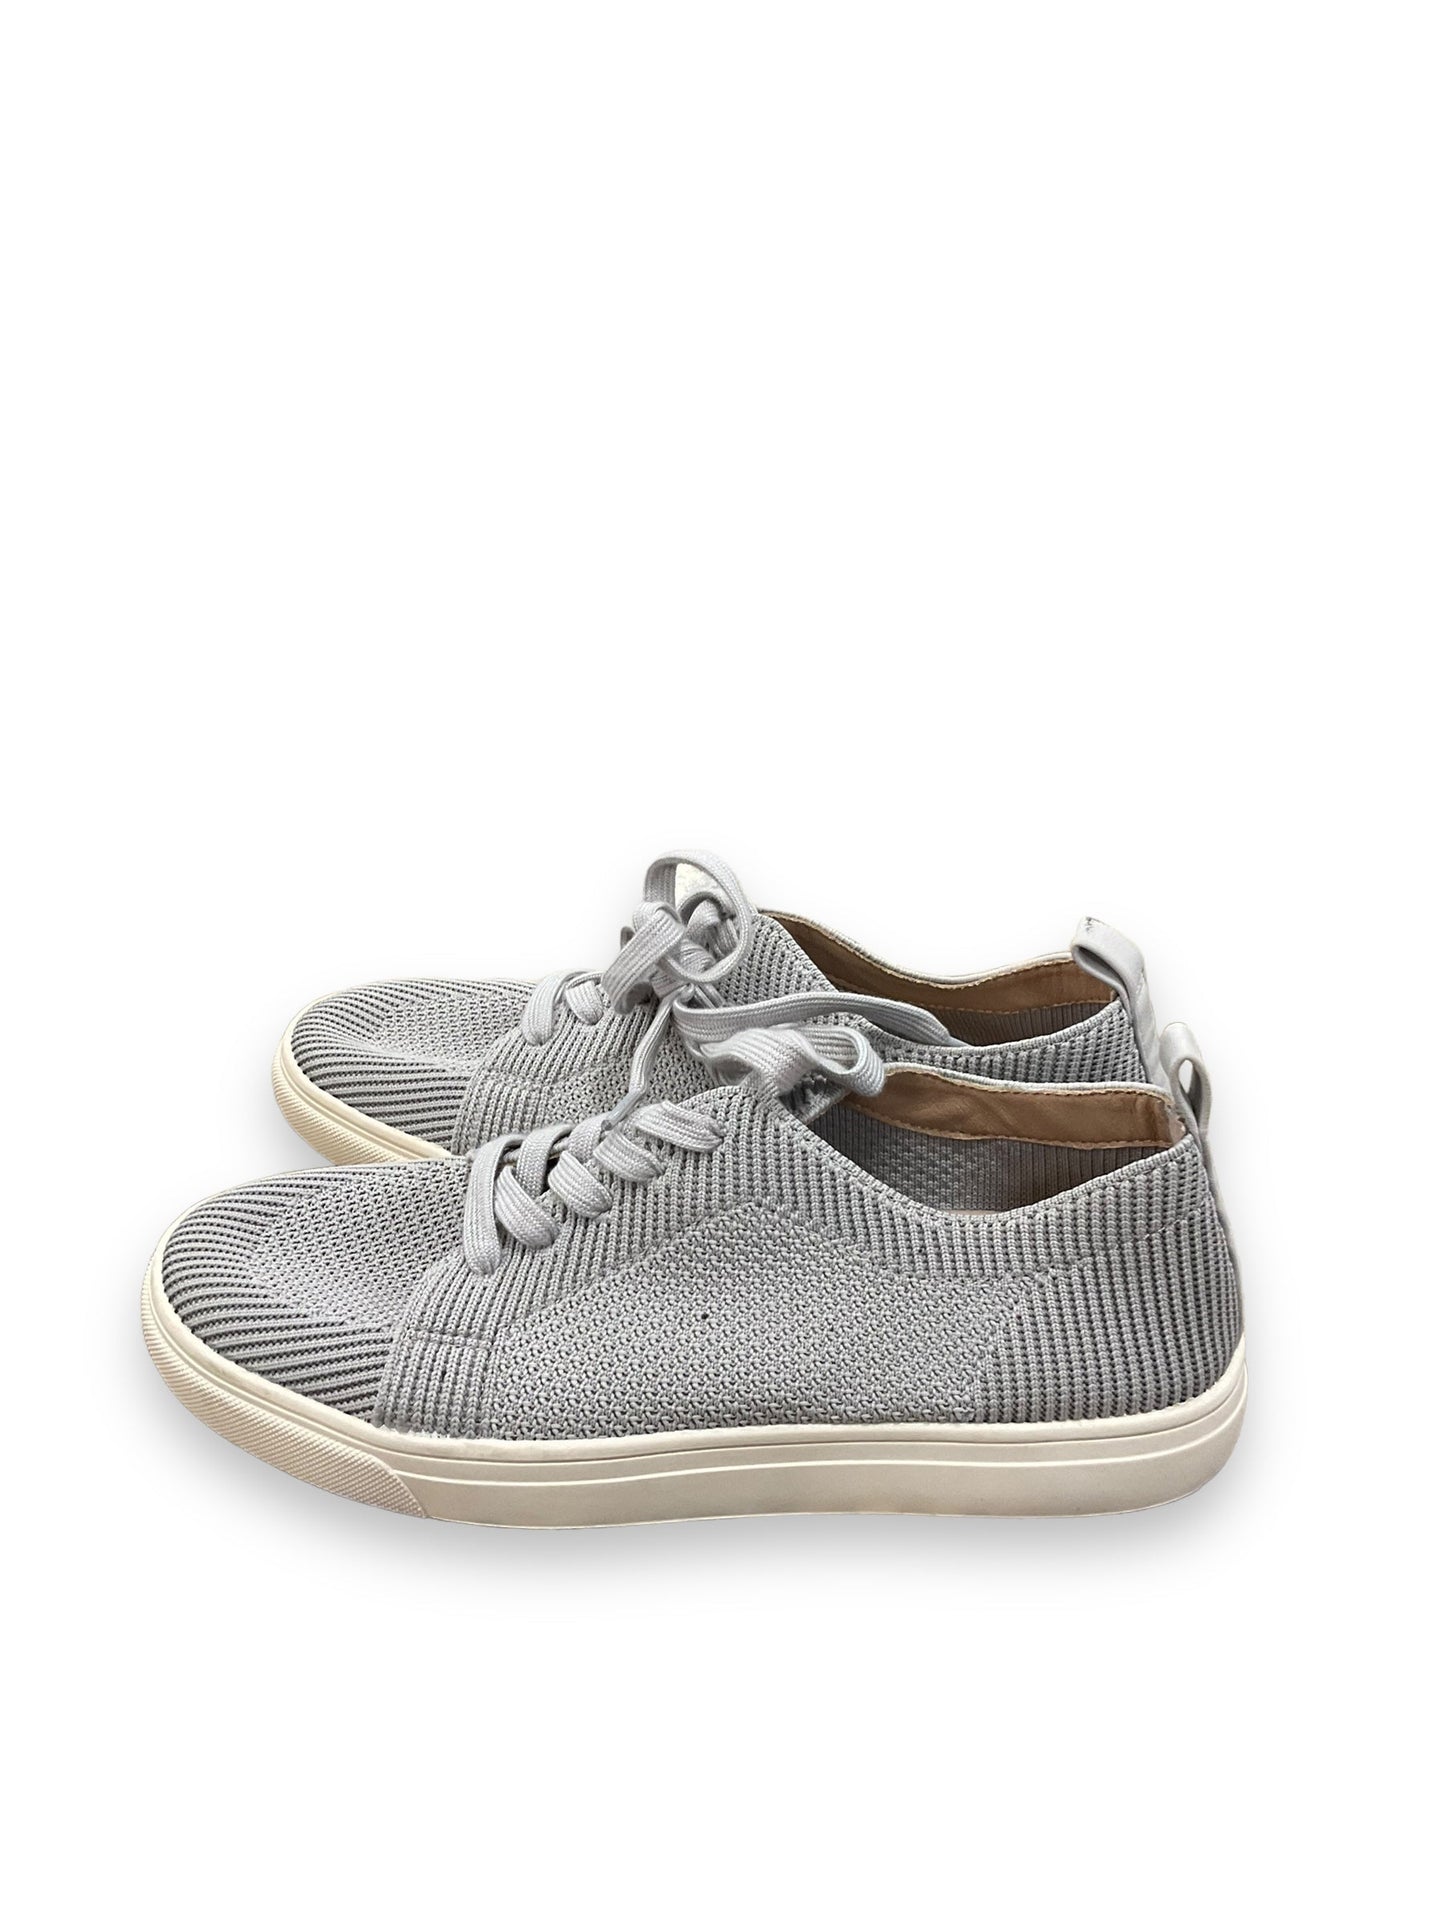 Shoes Sneakers By Lucky Brand  Size: 8.5